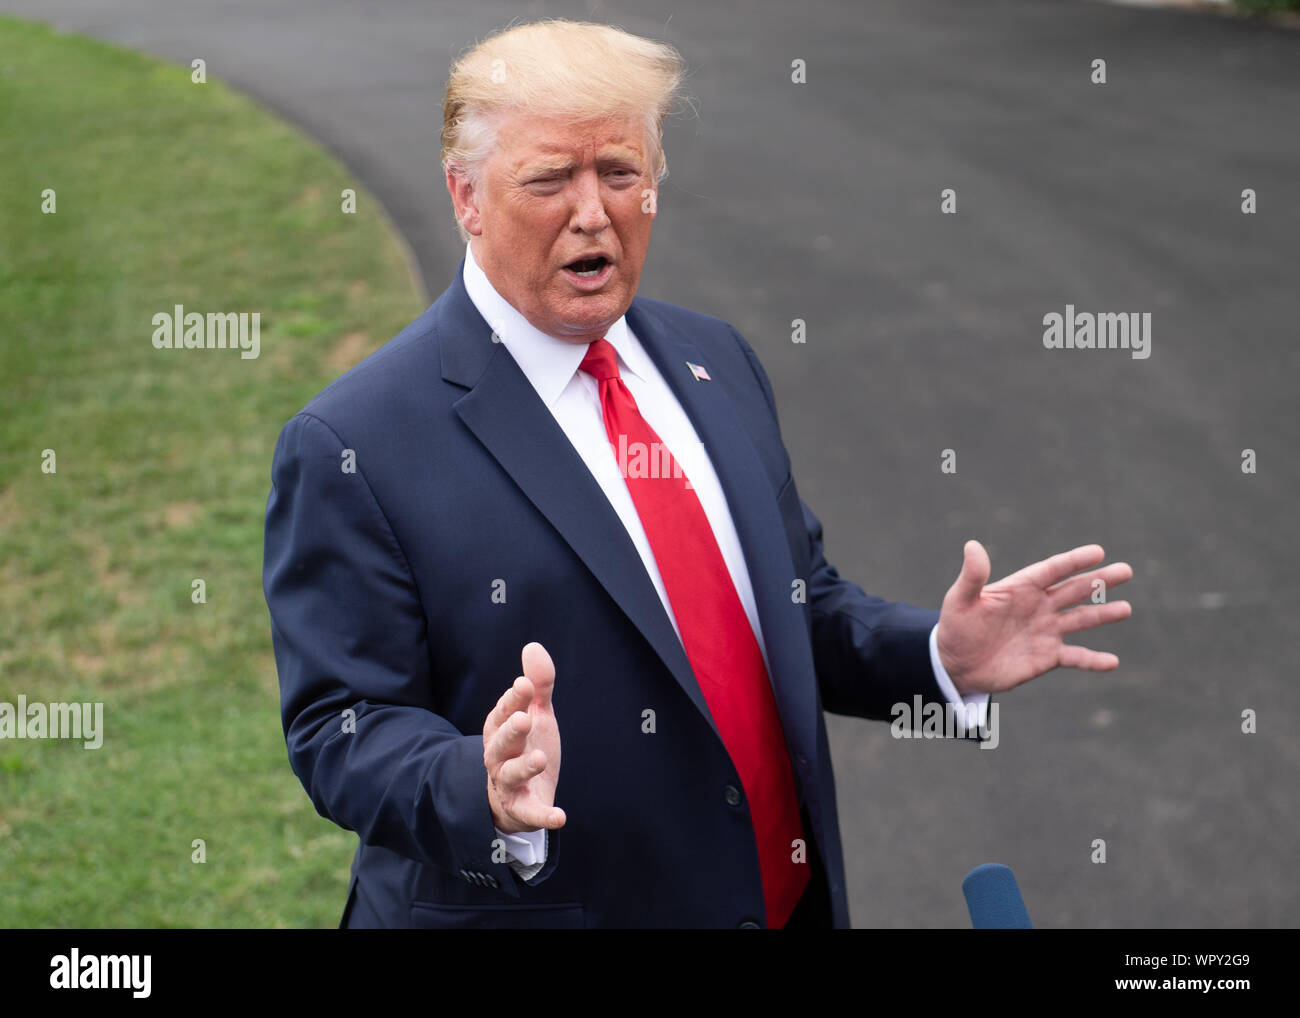 Washington DC, USA. 9th Sep 2019. President Donald Trump speaks to the media as he departs the White House for a rally in North Carolina, in Washington, DC on Monday, September 9, 2019. Photo by Kevin Dietsch/UPI Credit: UPI/Alamy Live News Stock Photo